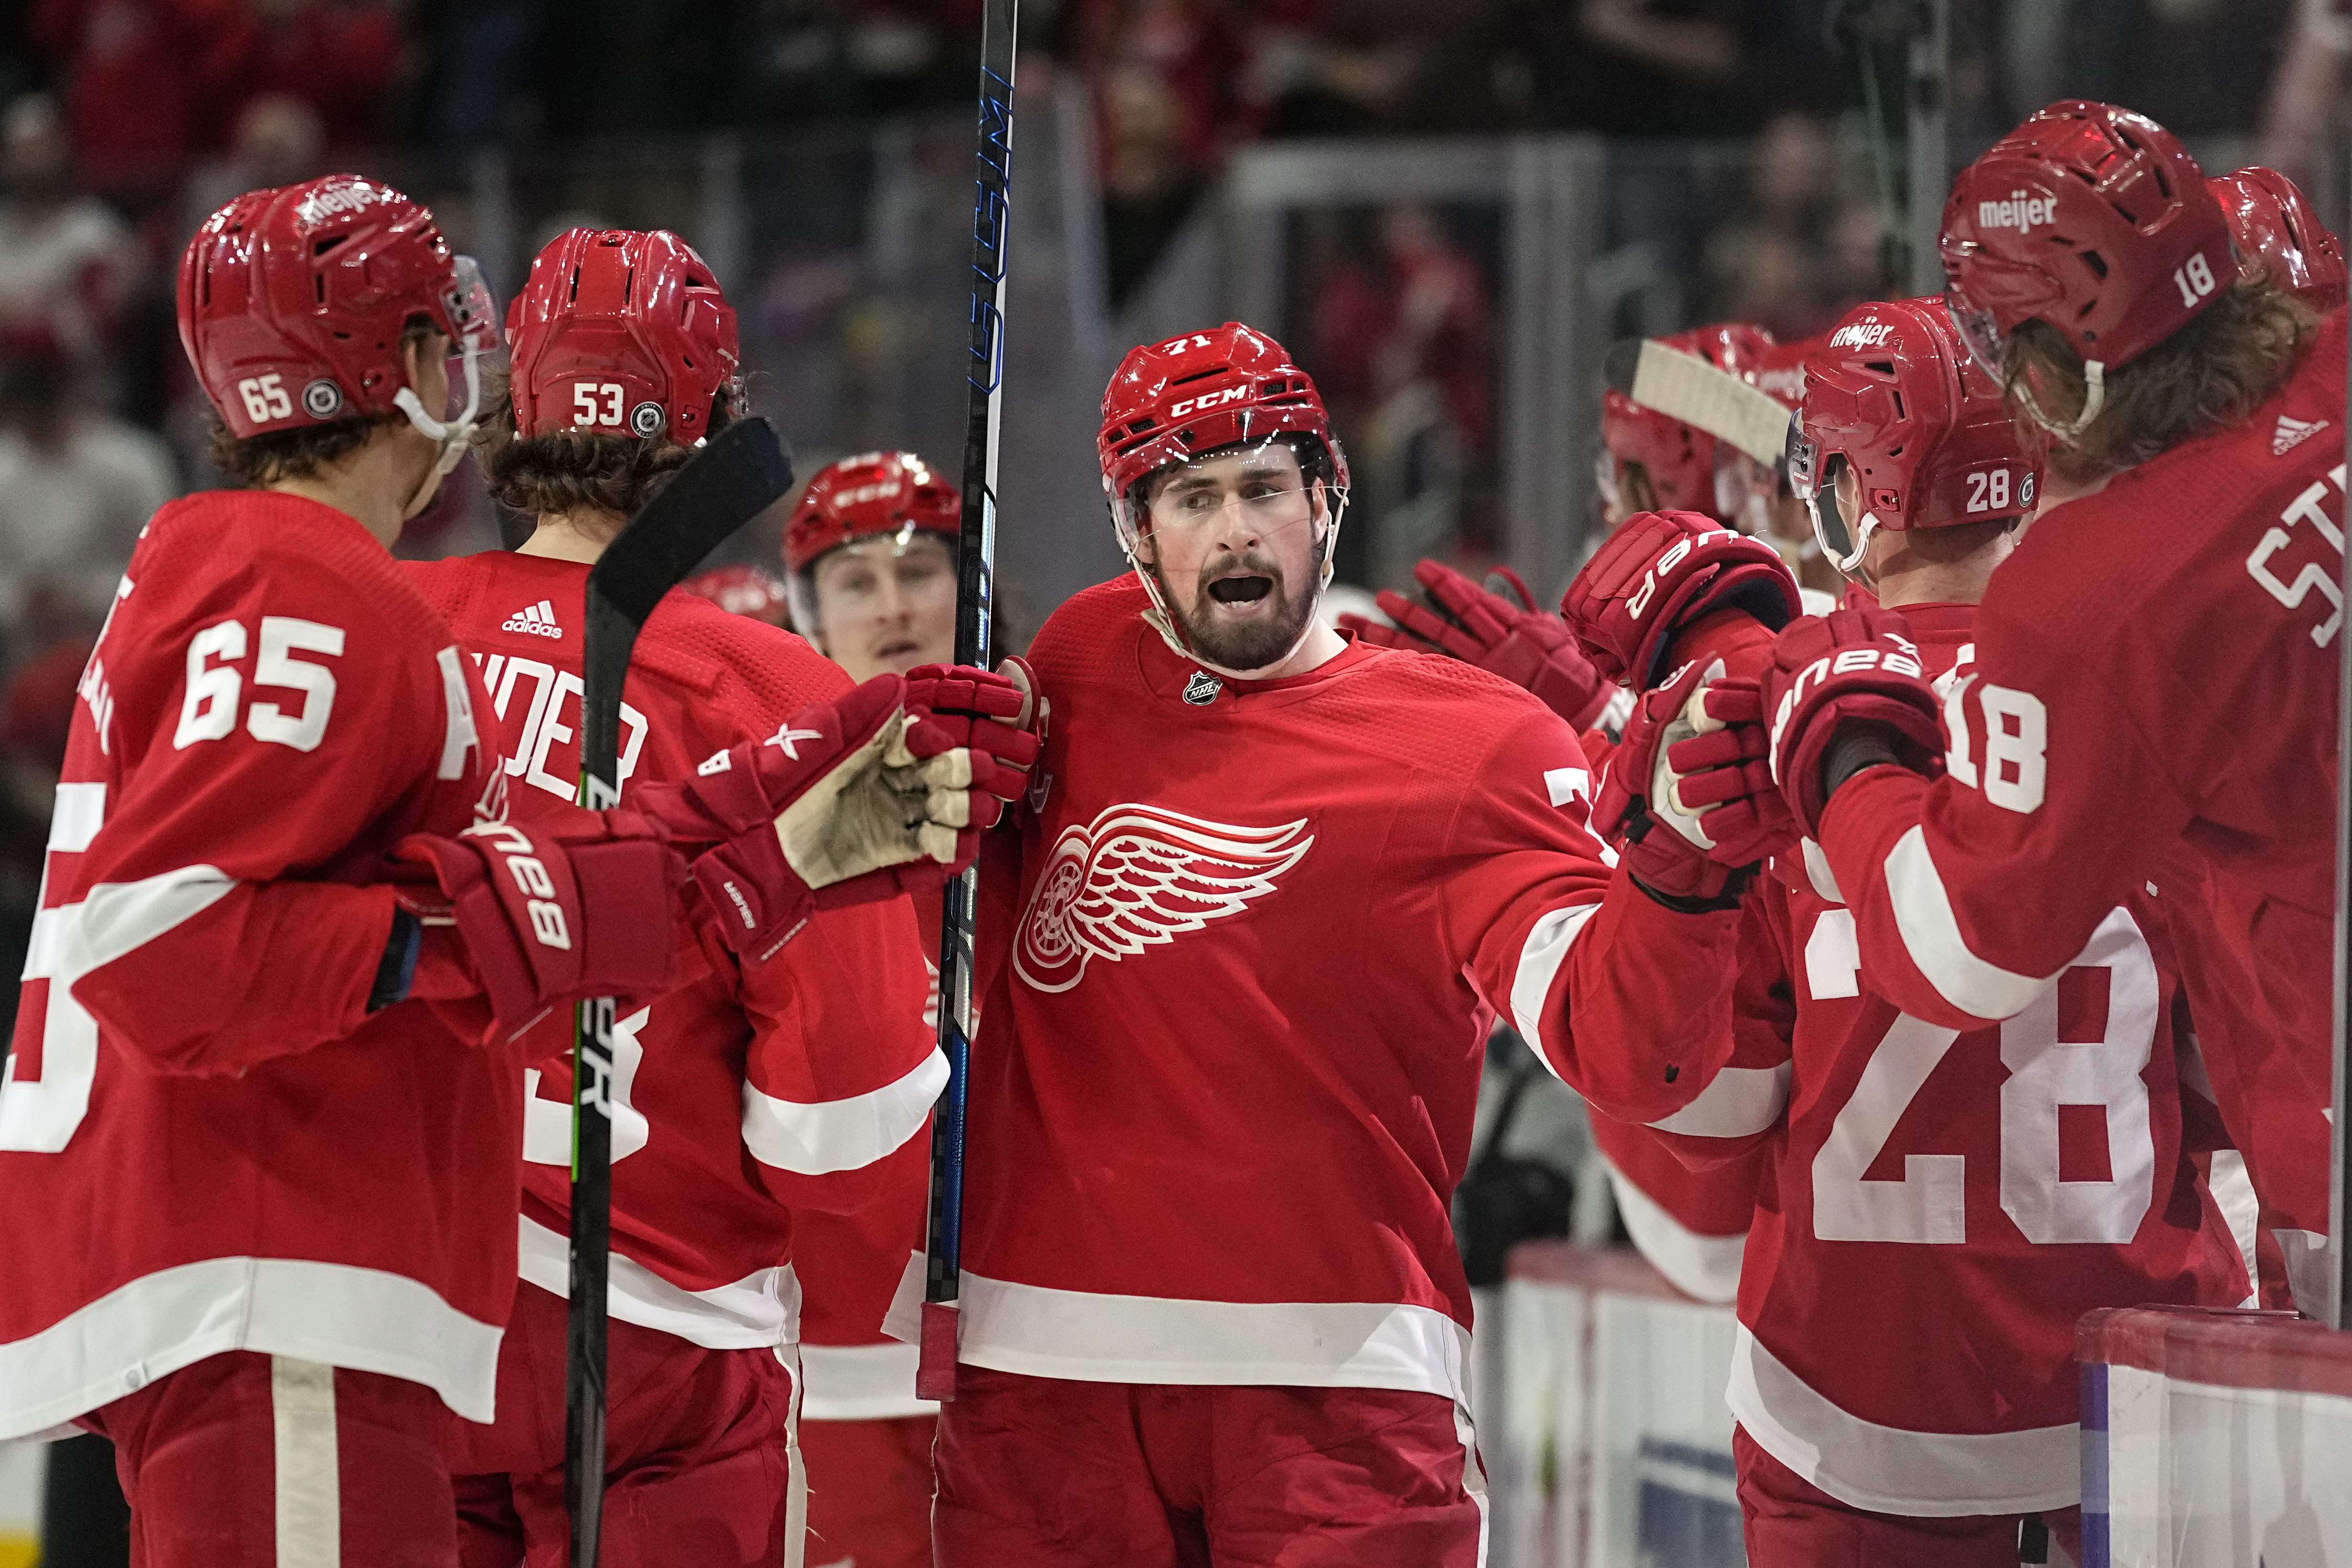 Alex Nedeljkovic goes unclaimed, remains Detroit Red Wings property